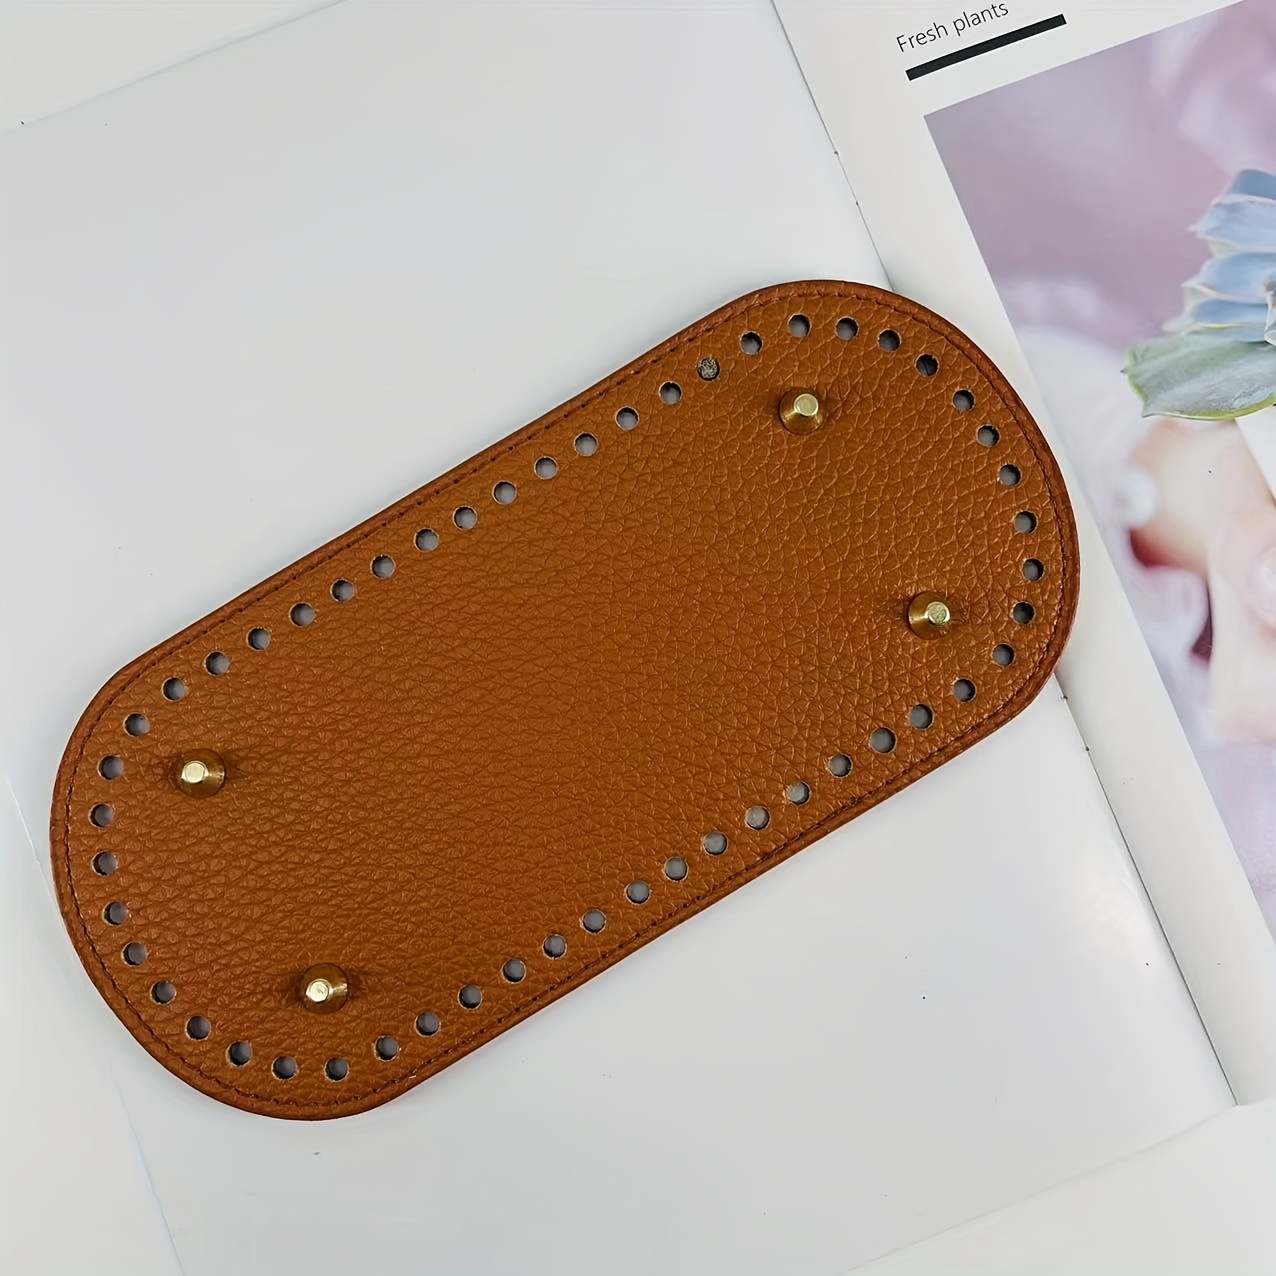 Handmade Genuine Leather Bags vs. PU Leather Products